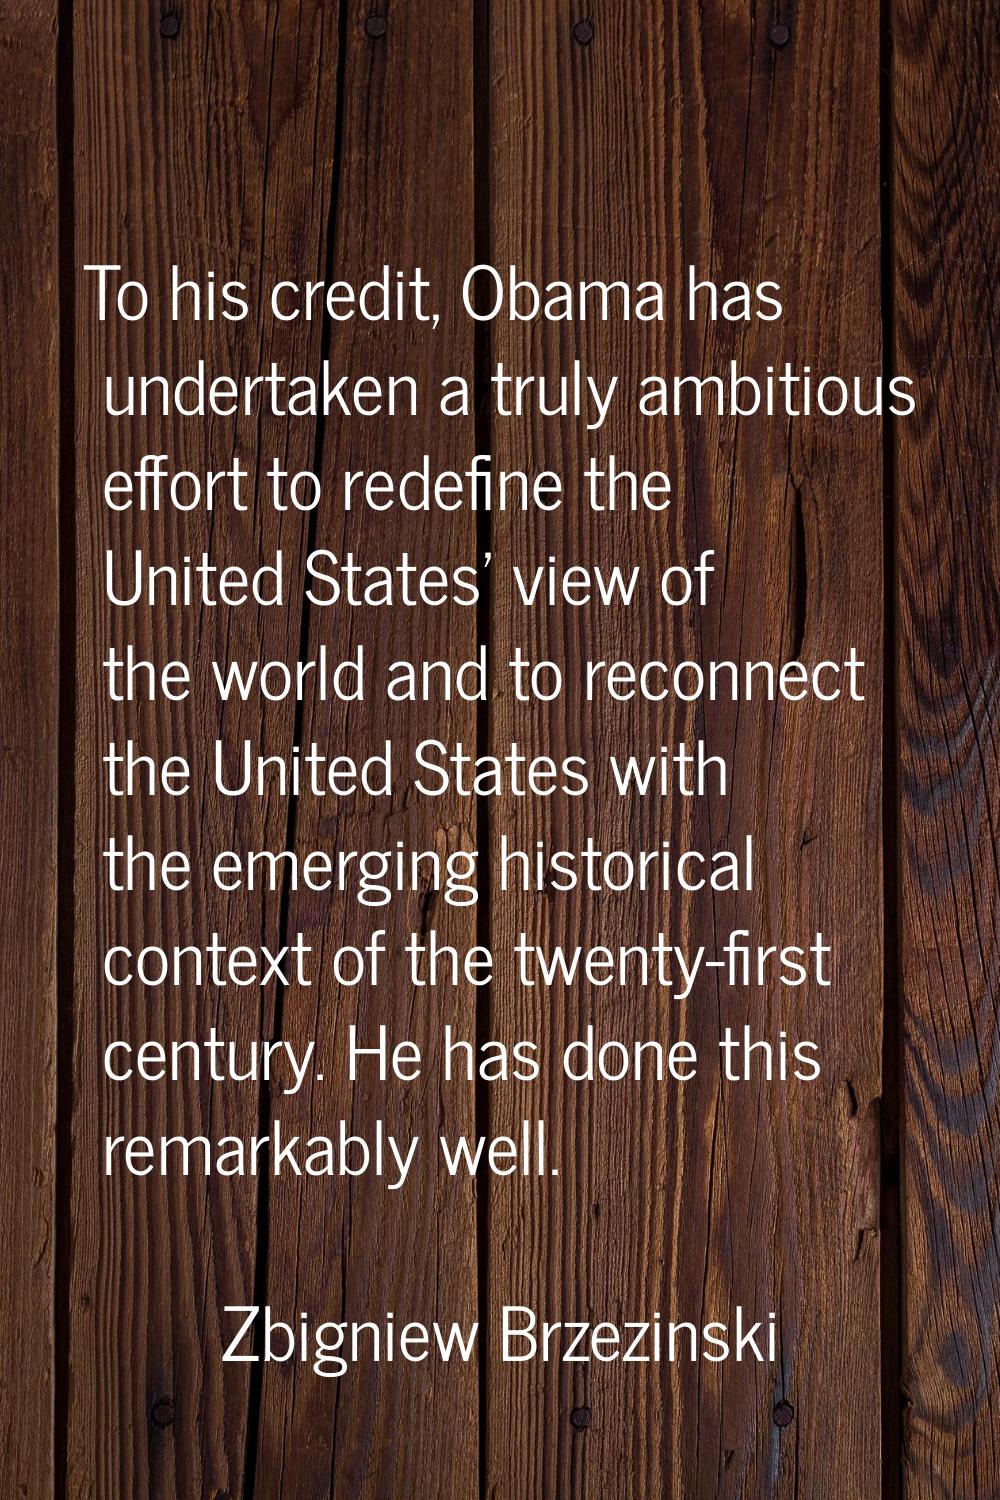 To his credit, Obama has undertaken a truly ambitious effort to redefine the United States' view of